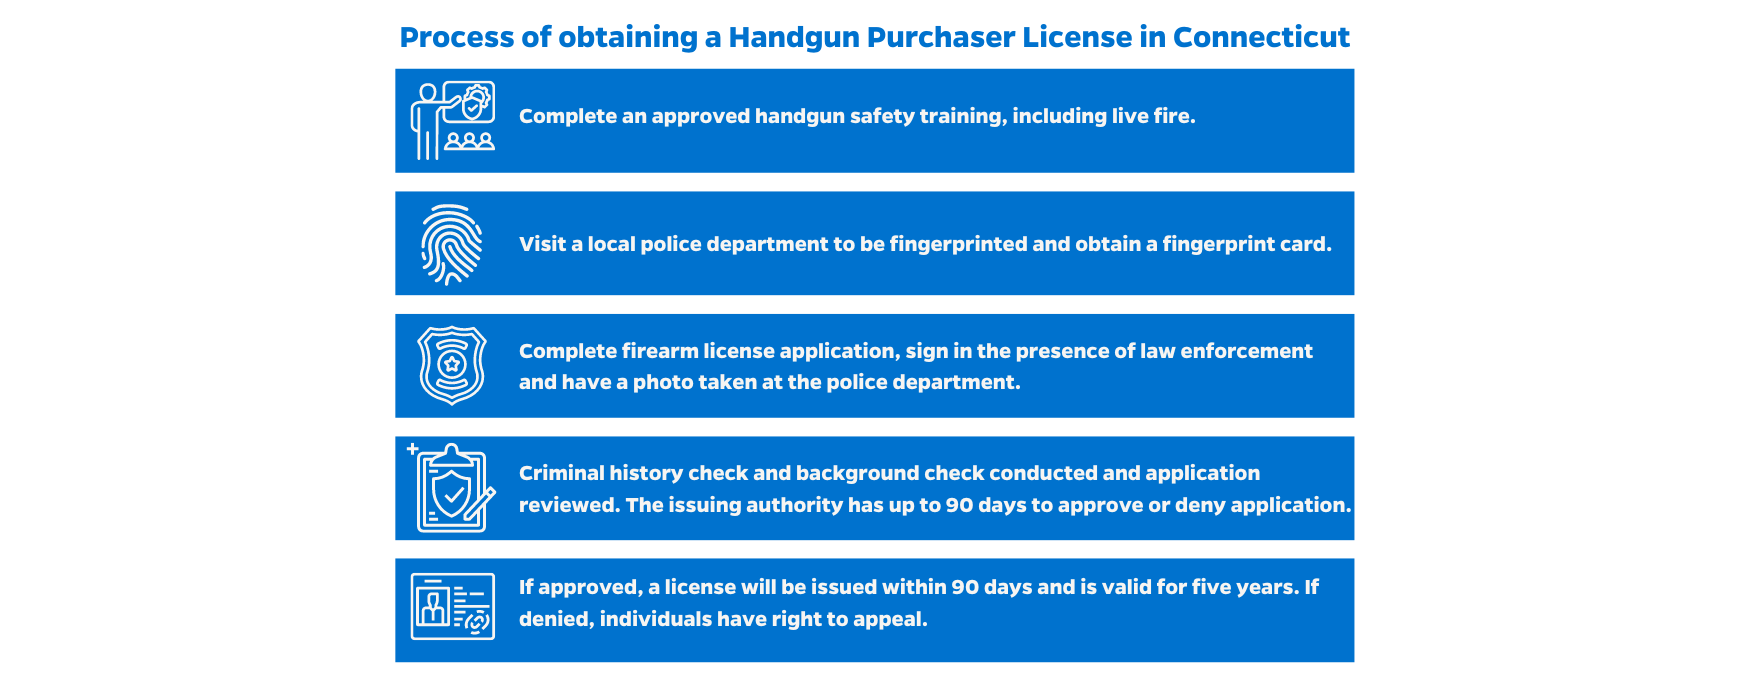 Steps to getting a firearm purchaser licesne in Connecticut: 1-complete live fire safety course 2-fingerprinting 3-complete application and sign it in front of law enforcement 4-criminal history and background check 5-approved or denied  within 90 days, right to appeal denial